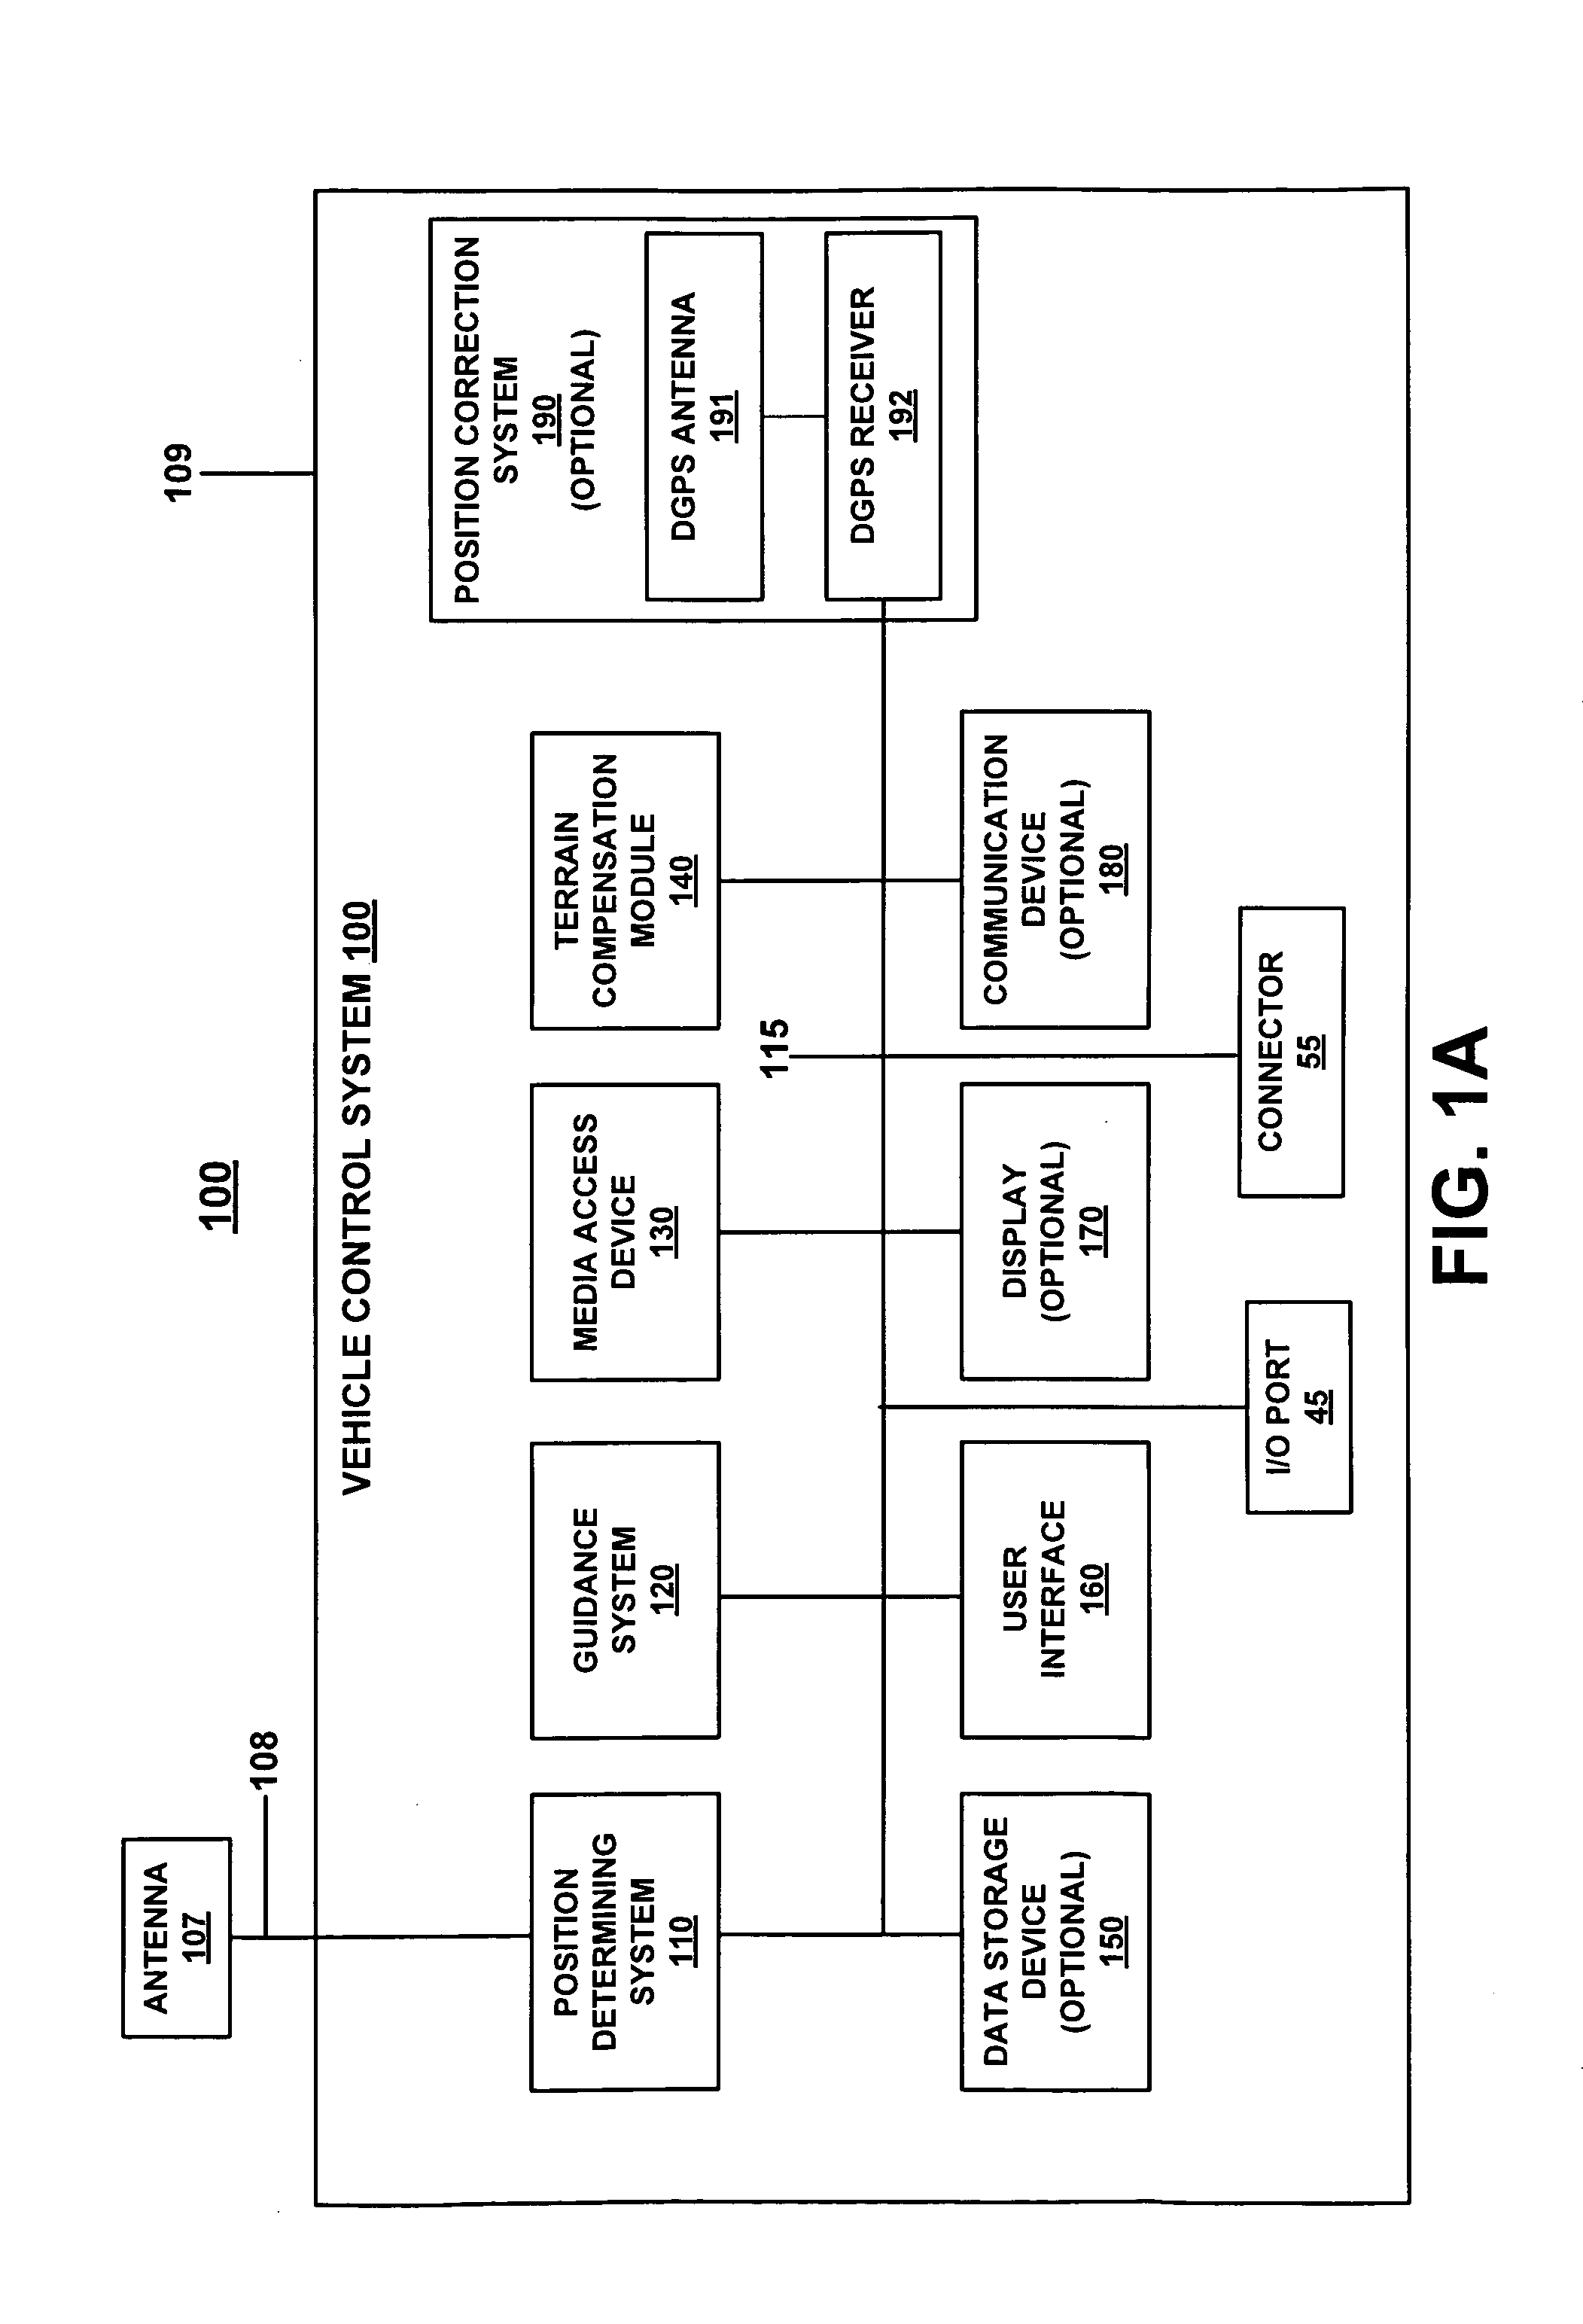 Method and system for determining the path of a mobile machine